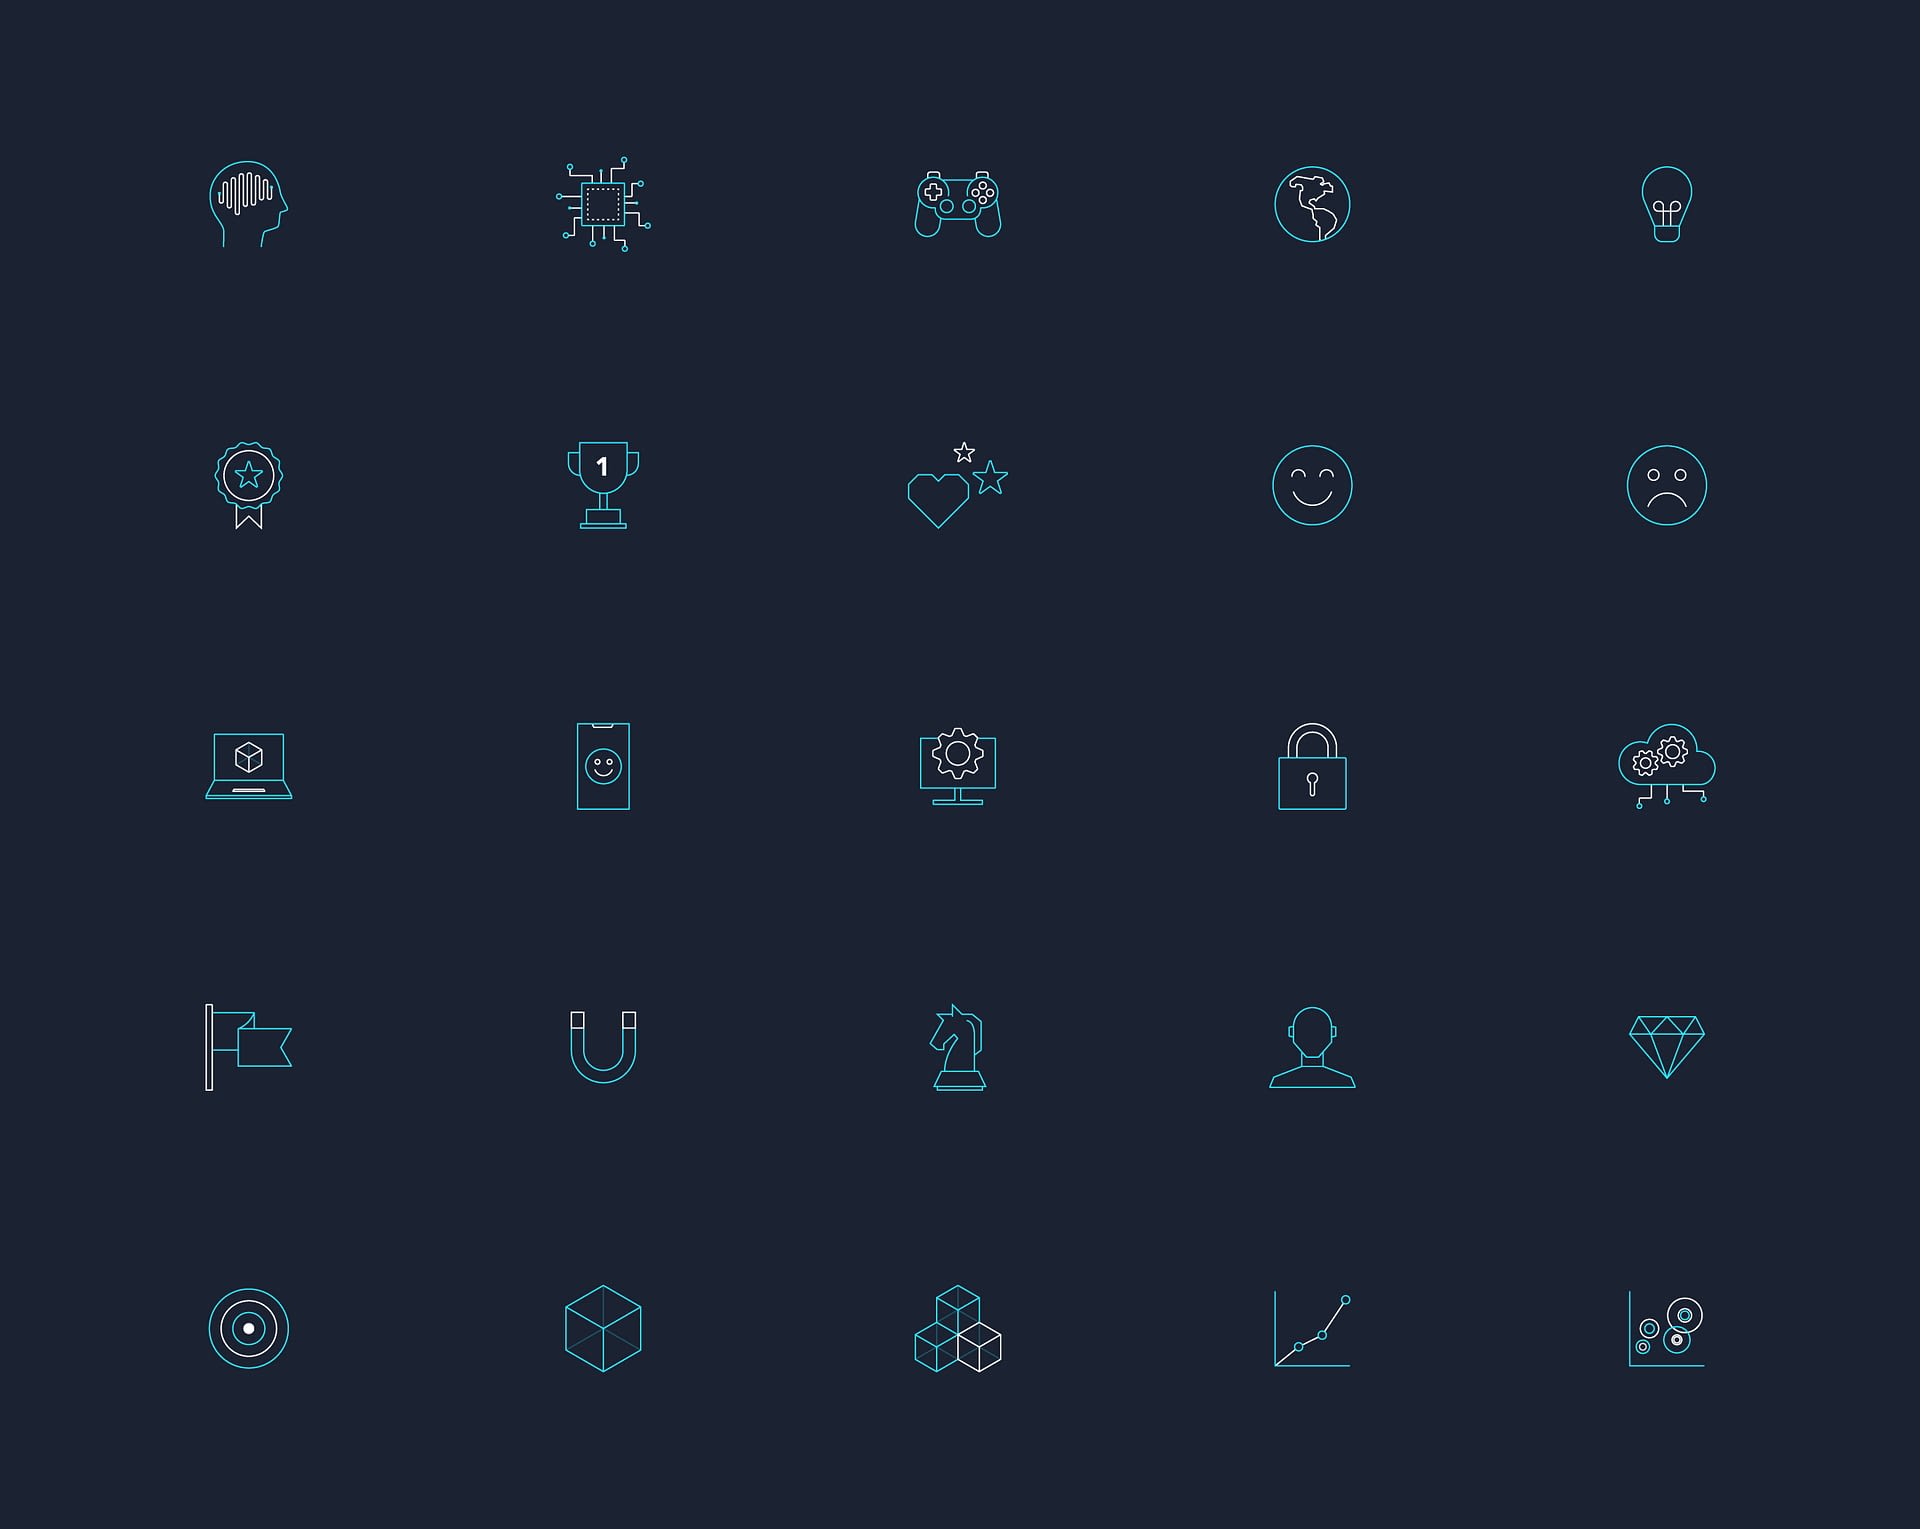 A set of brand icons in a 5 by 5 grid.